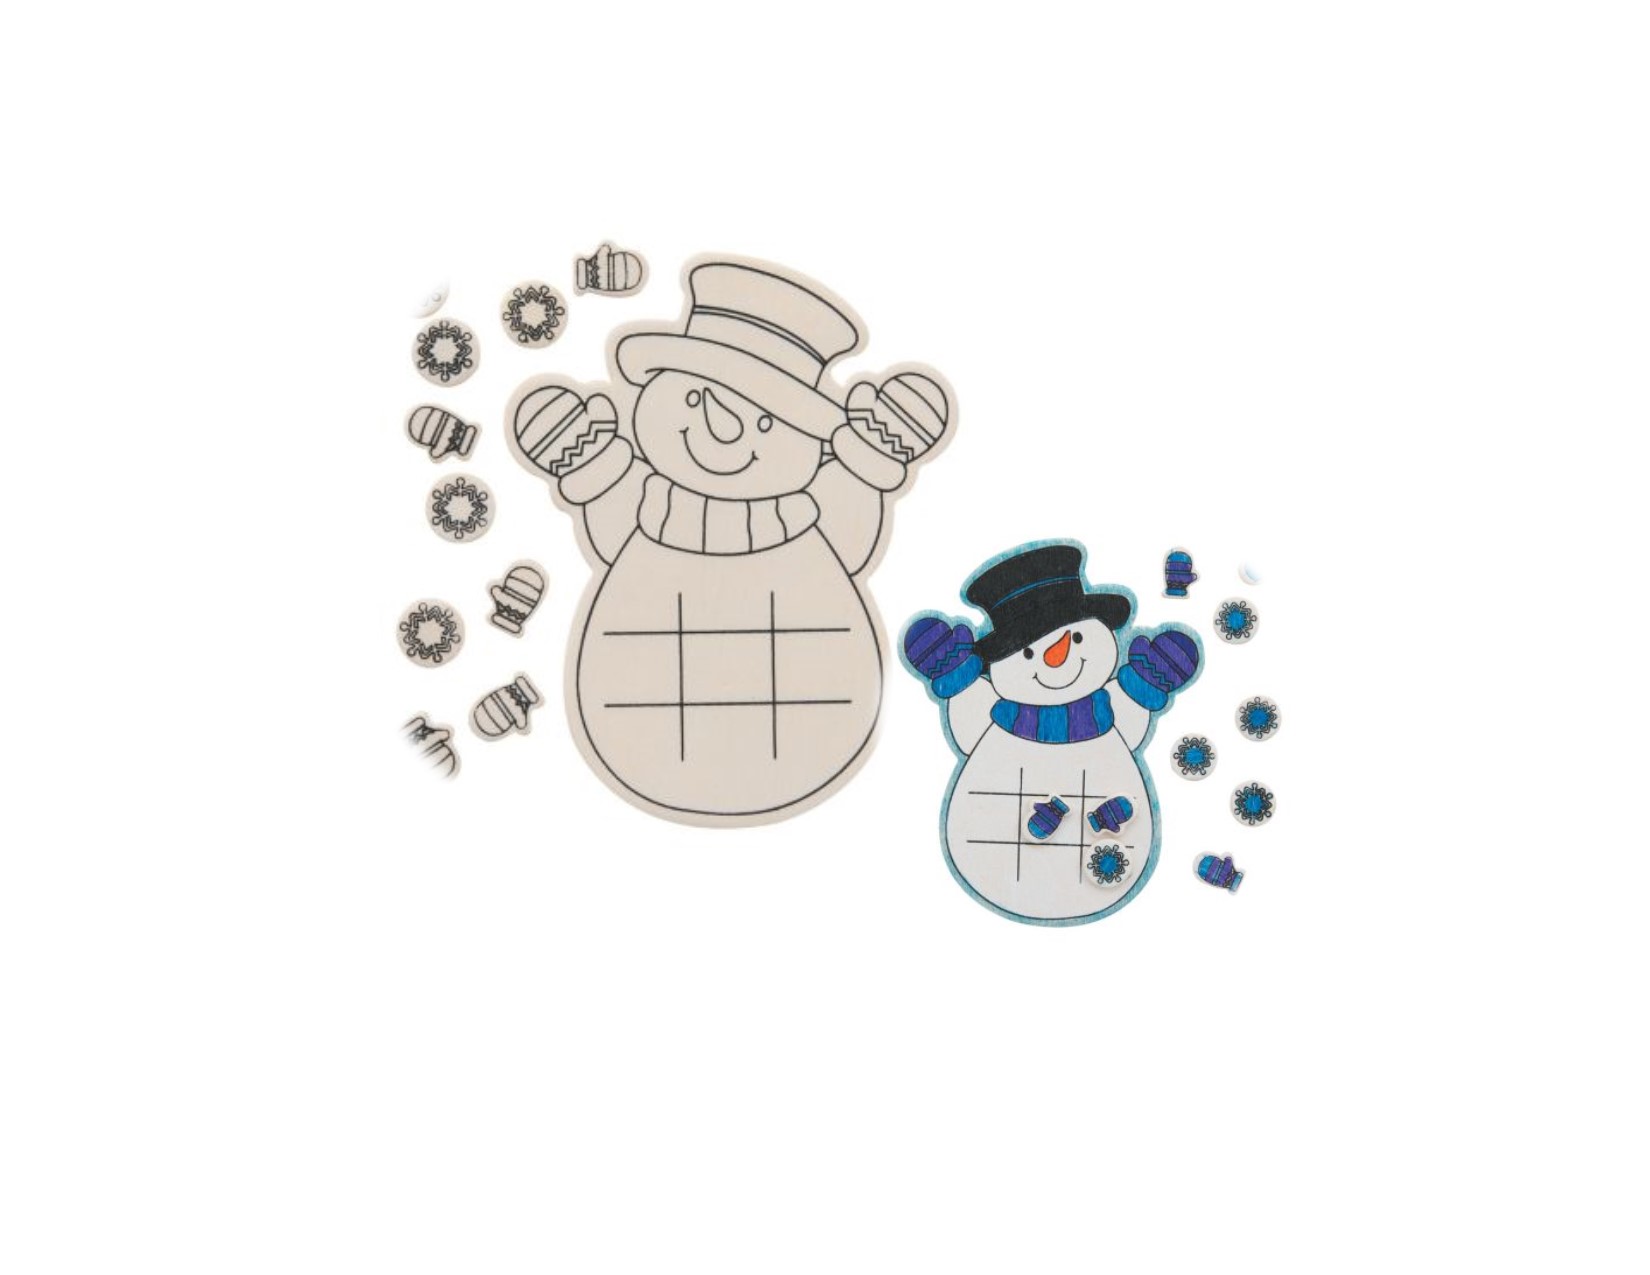 Two snowman tic-tac-toe craft pieces. One snowman and games pieces uncolored. One snowman and game pieces with blue, purple, white and black coloration.